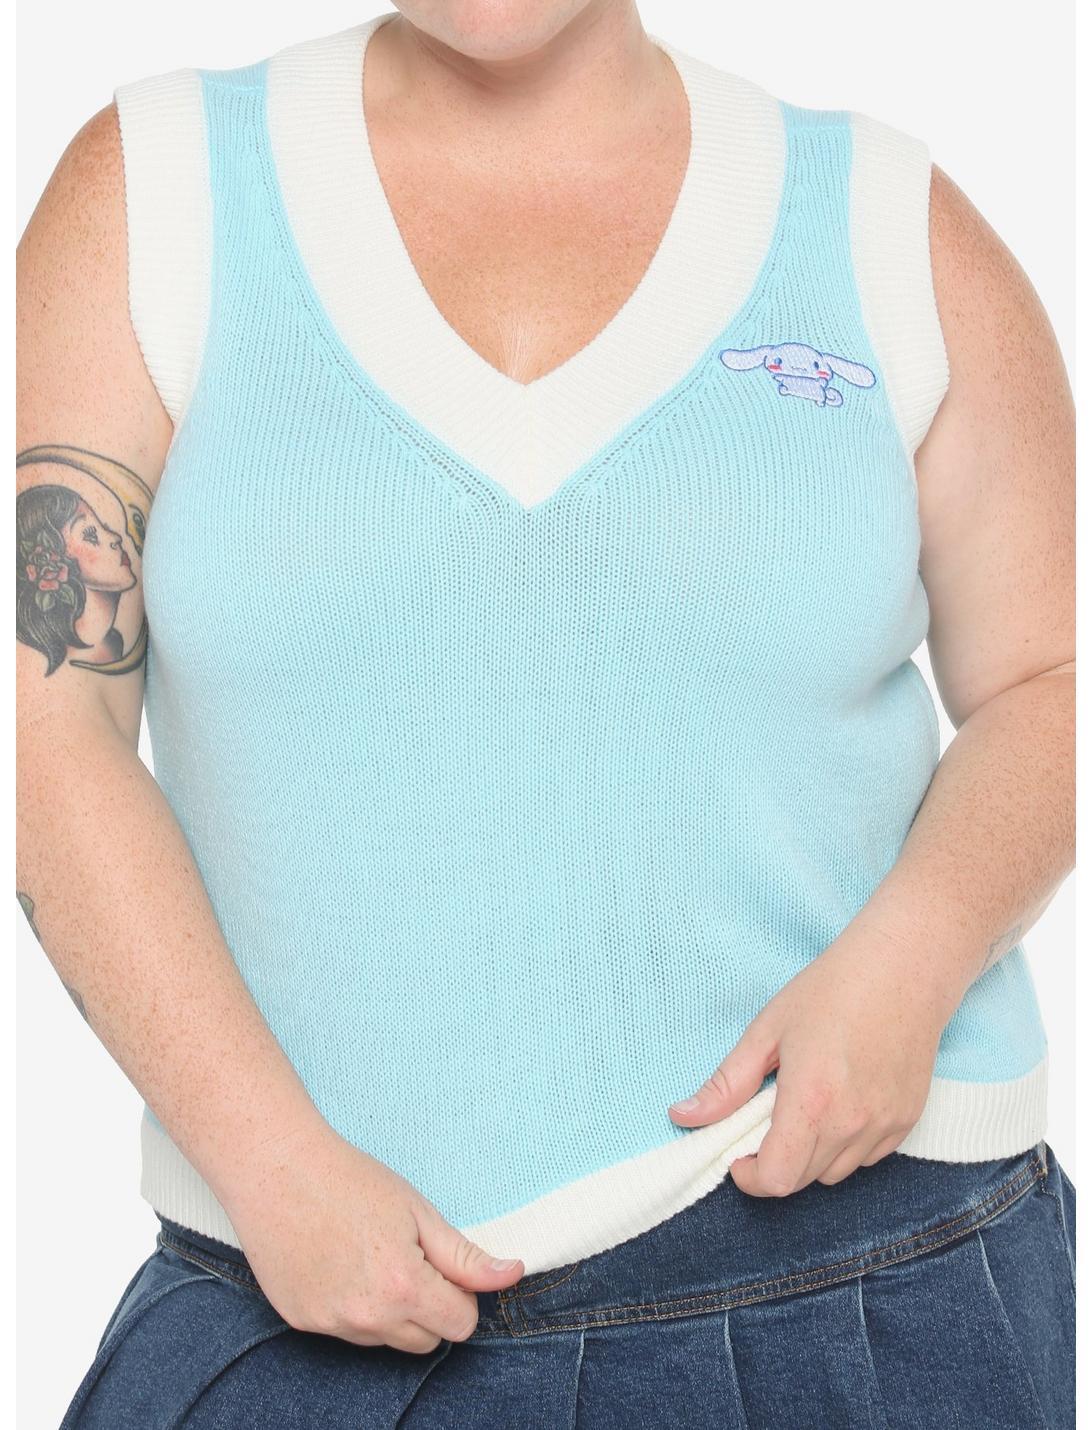 Cinnamoroll Embroidery Girls Sweater Vest Plus Size, MULTI, hi-res